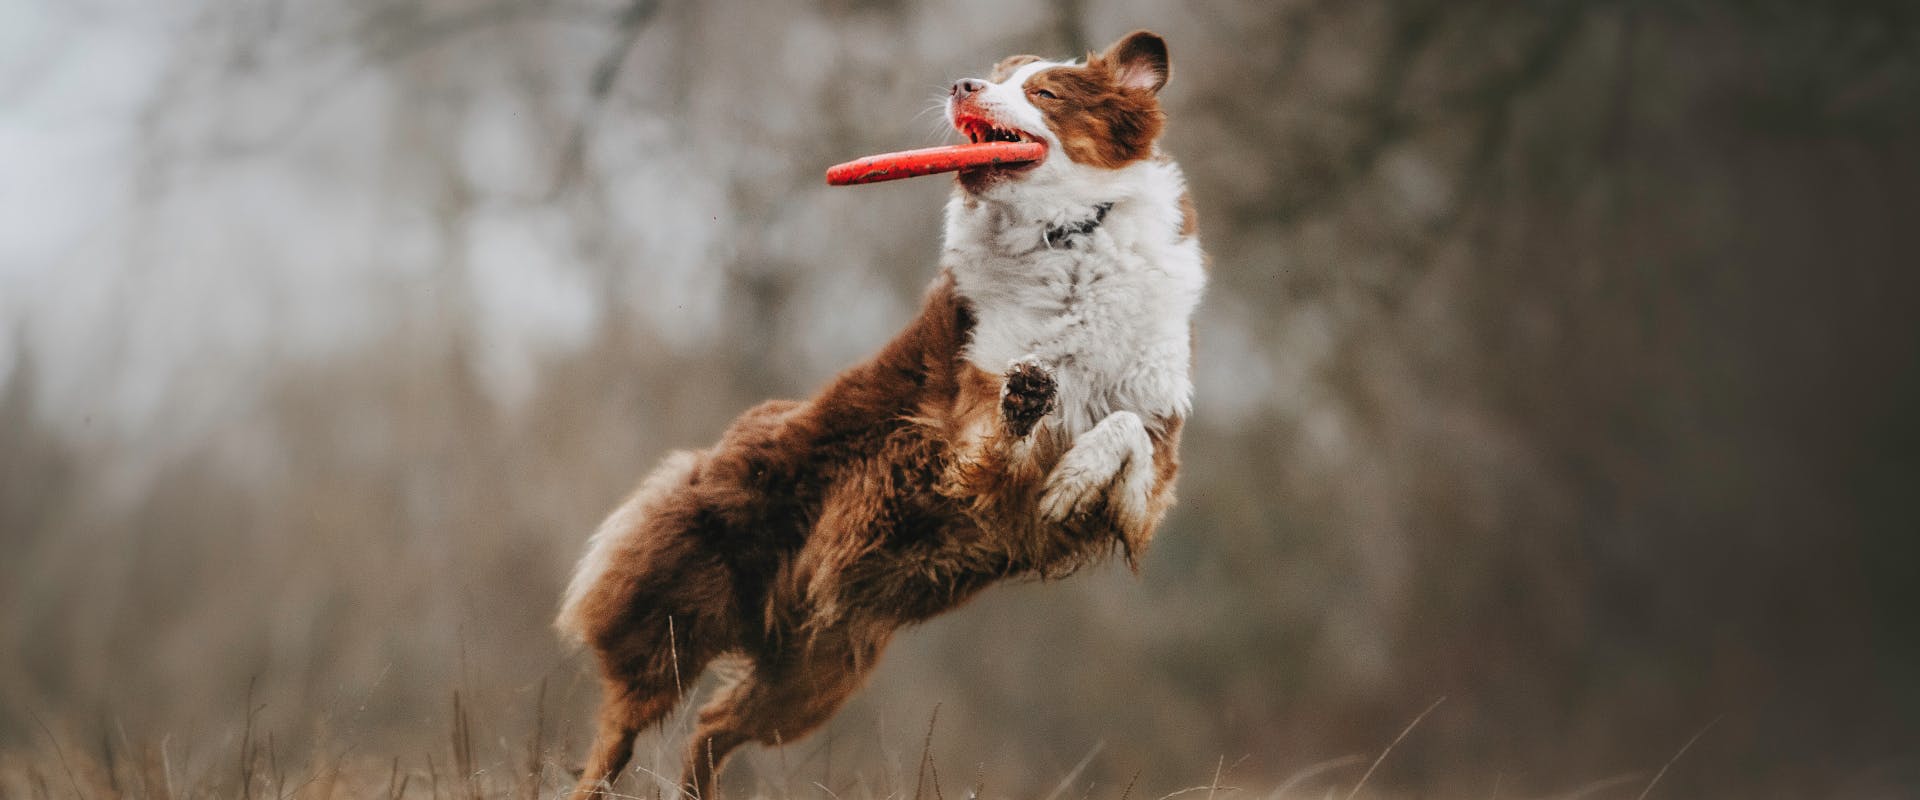 a brown and white border collie active dog jumping in the air as it catches a red frisbee